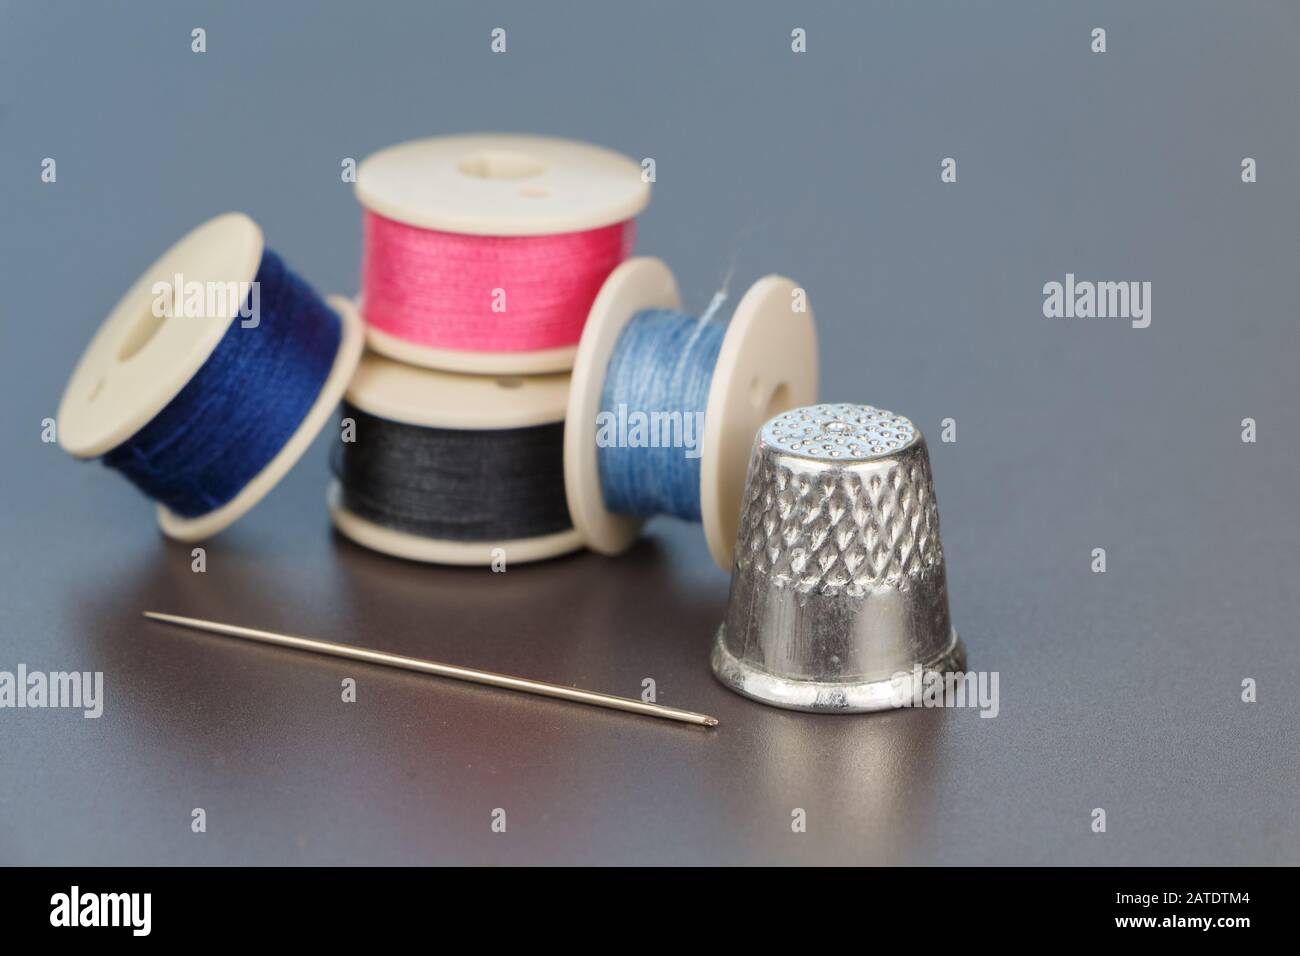 Reel of blue, pink and gray thread for sewing, needle and thimble Stock Photo